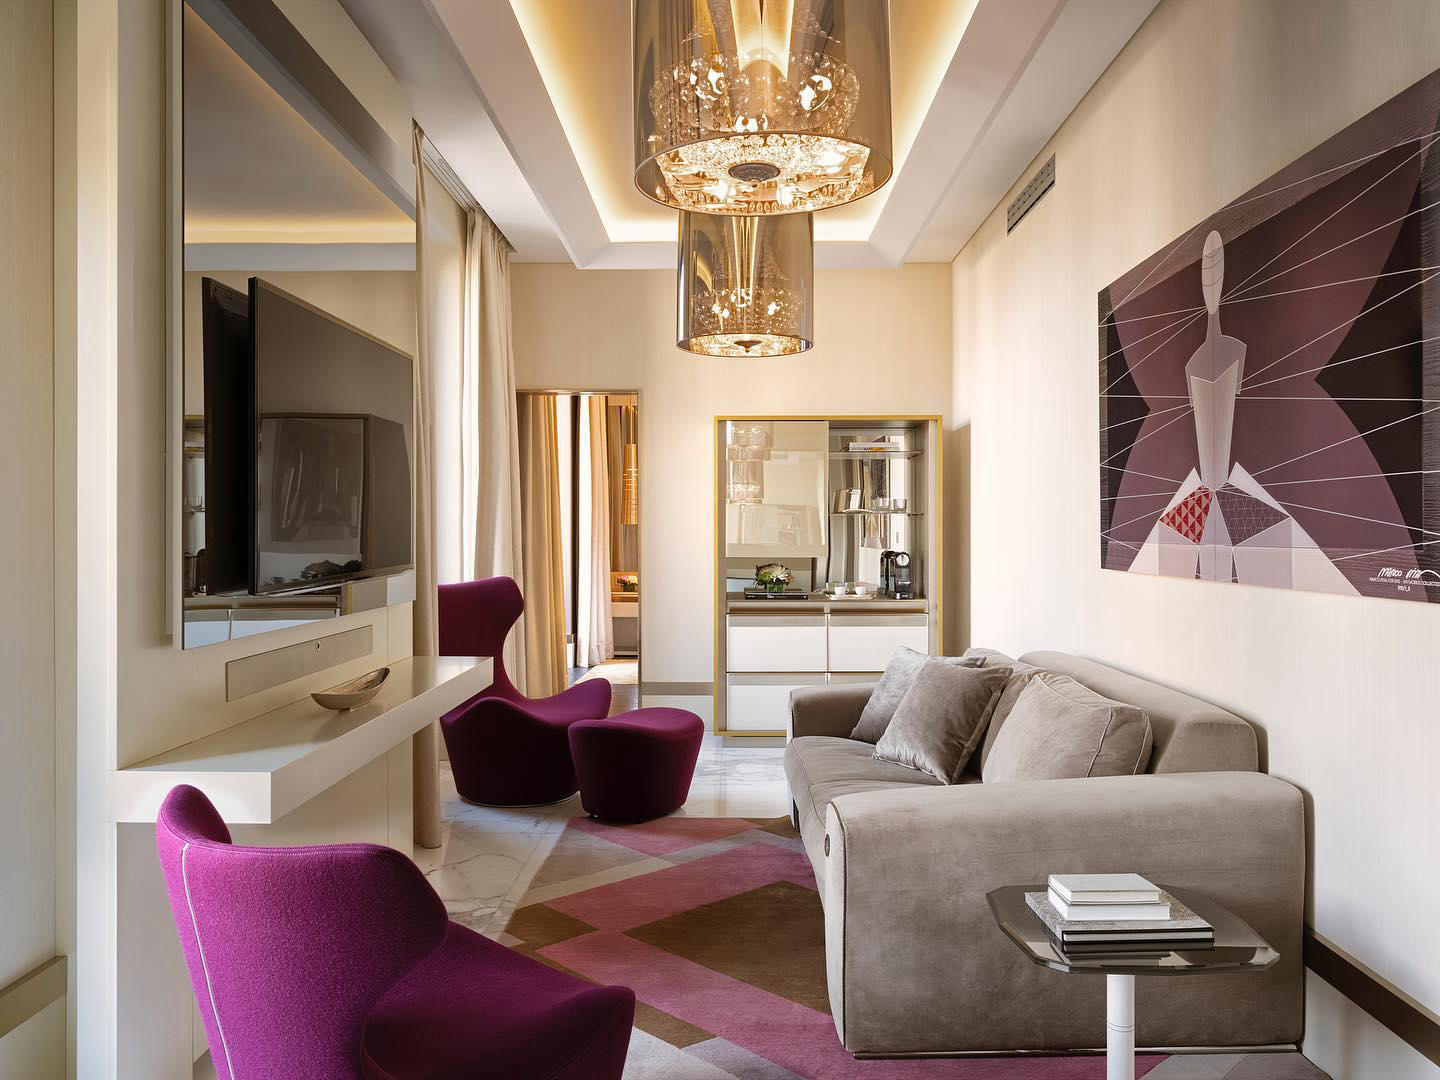 Excelsior Hotel Gallia, Milan - Surprise your loved ones with a trip to Milan during the sales week